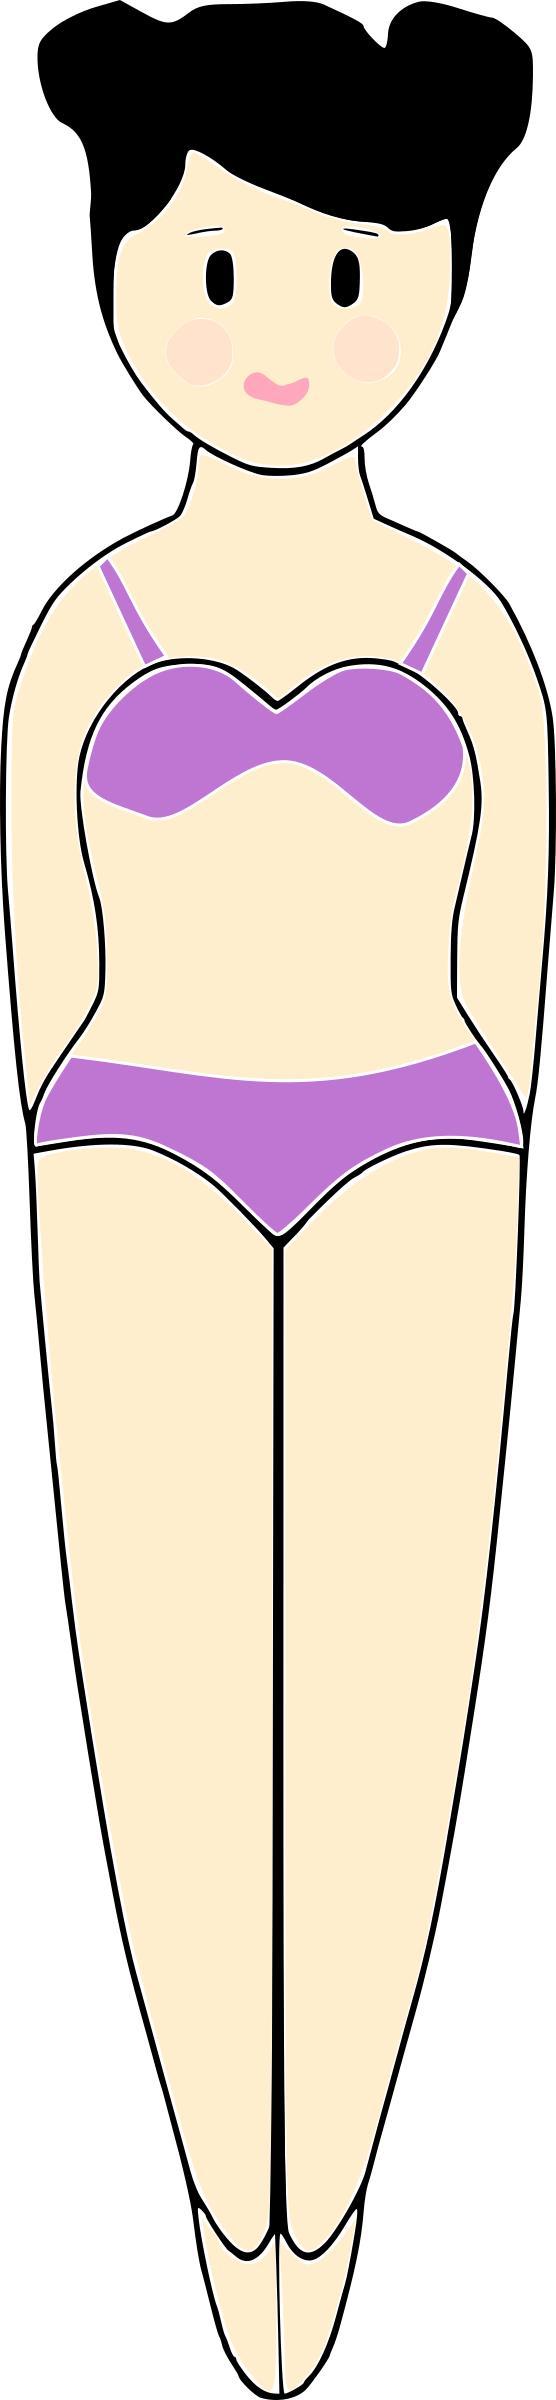 Girl in a Bathing Suit png transparent